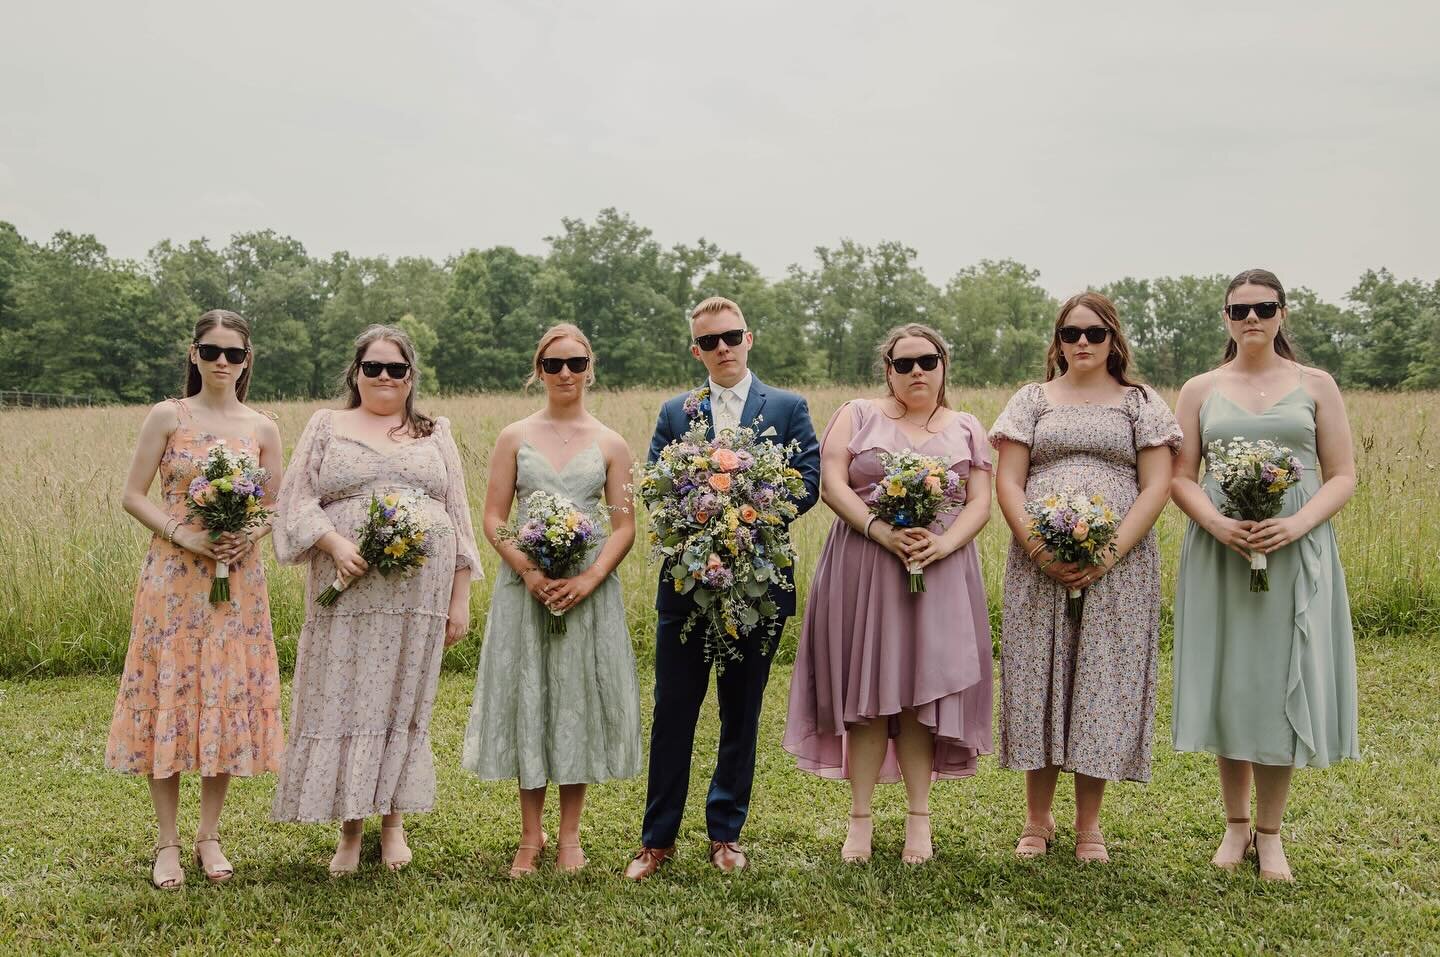 Here&rsquo;s to hoping for more wonderfully fun wedding parties in 2024. 

P.S. I love a good mismatched bridesmaid look.